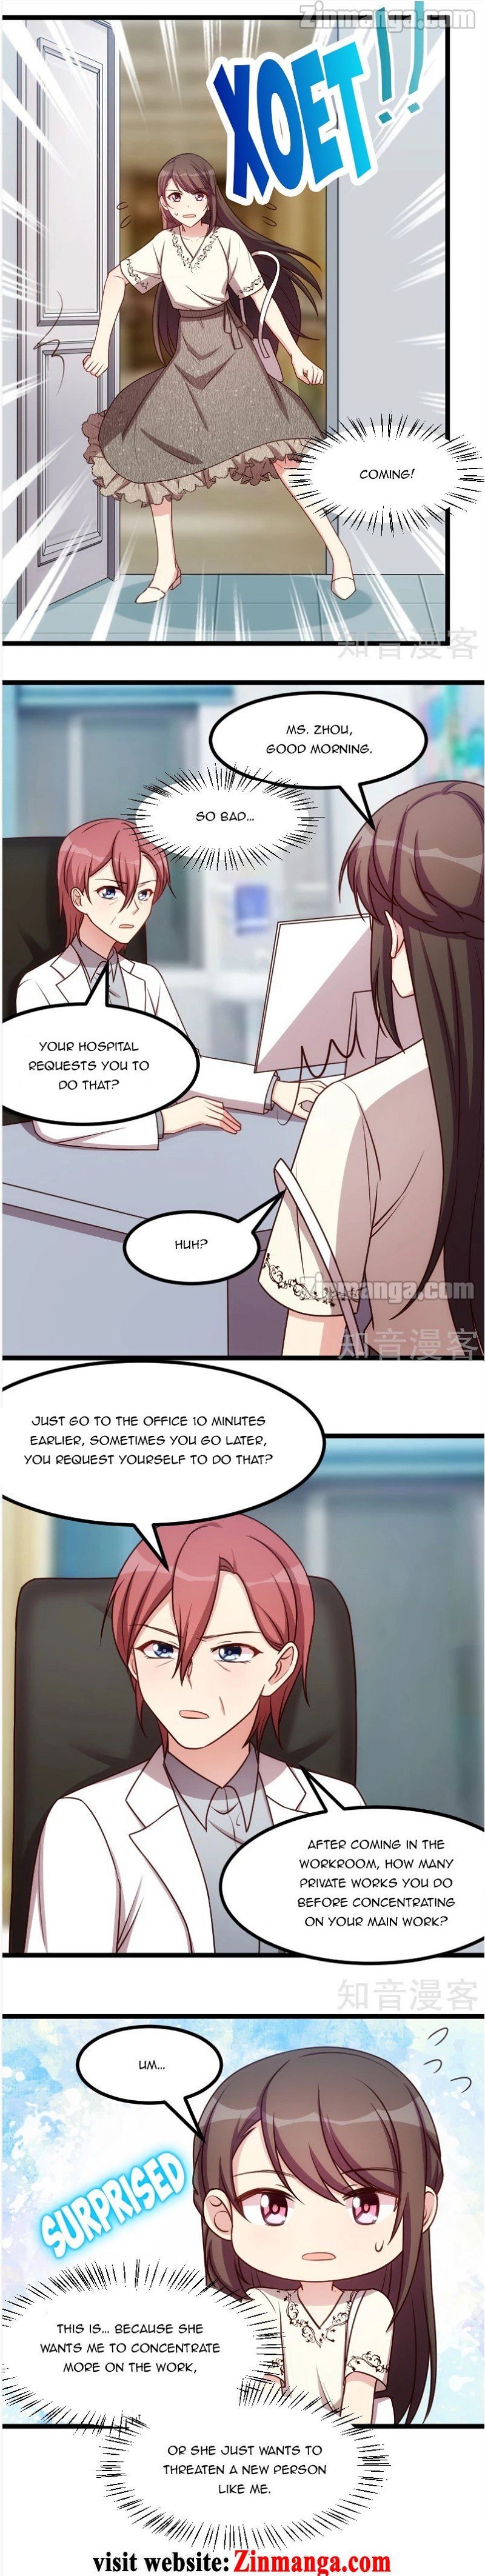 CEO's Sudden Proposal Chapter 212 page 2